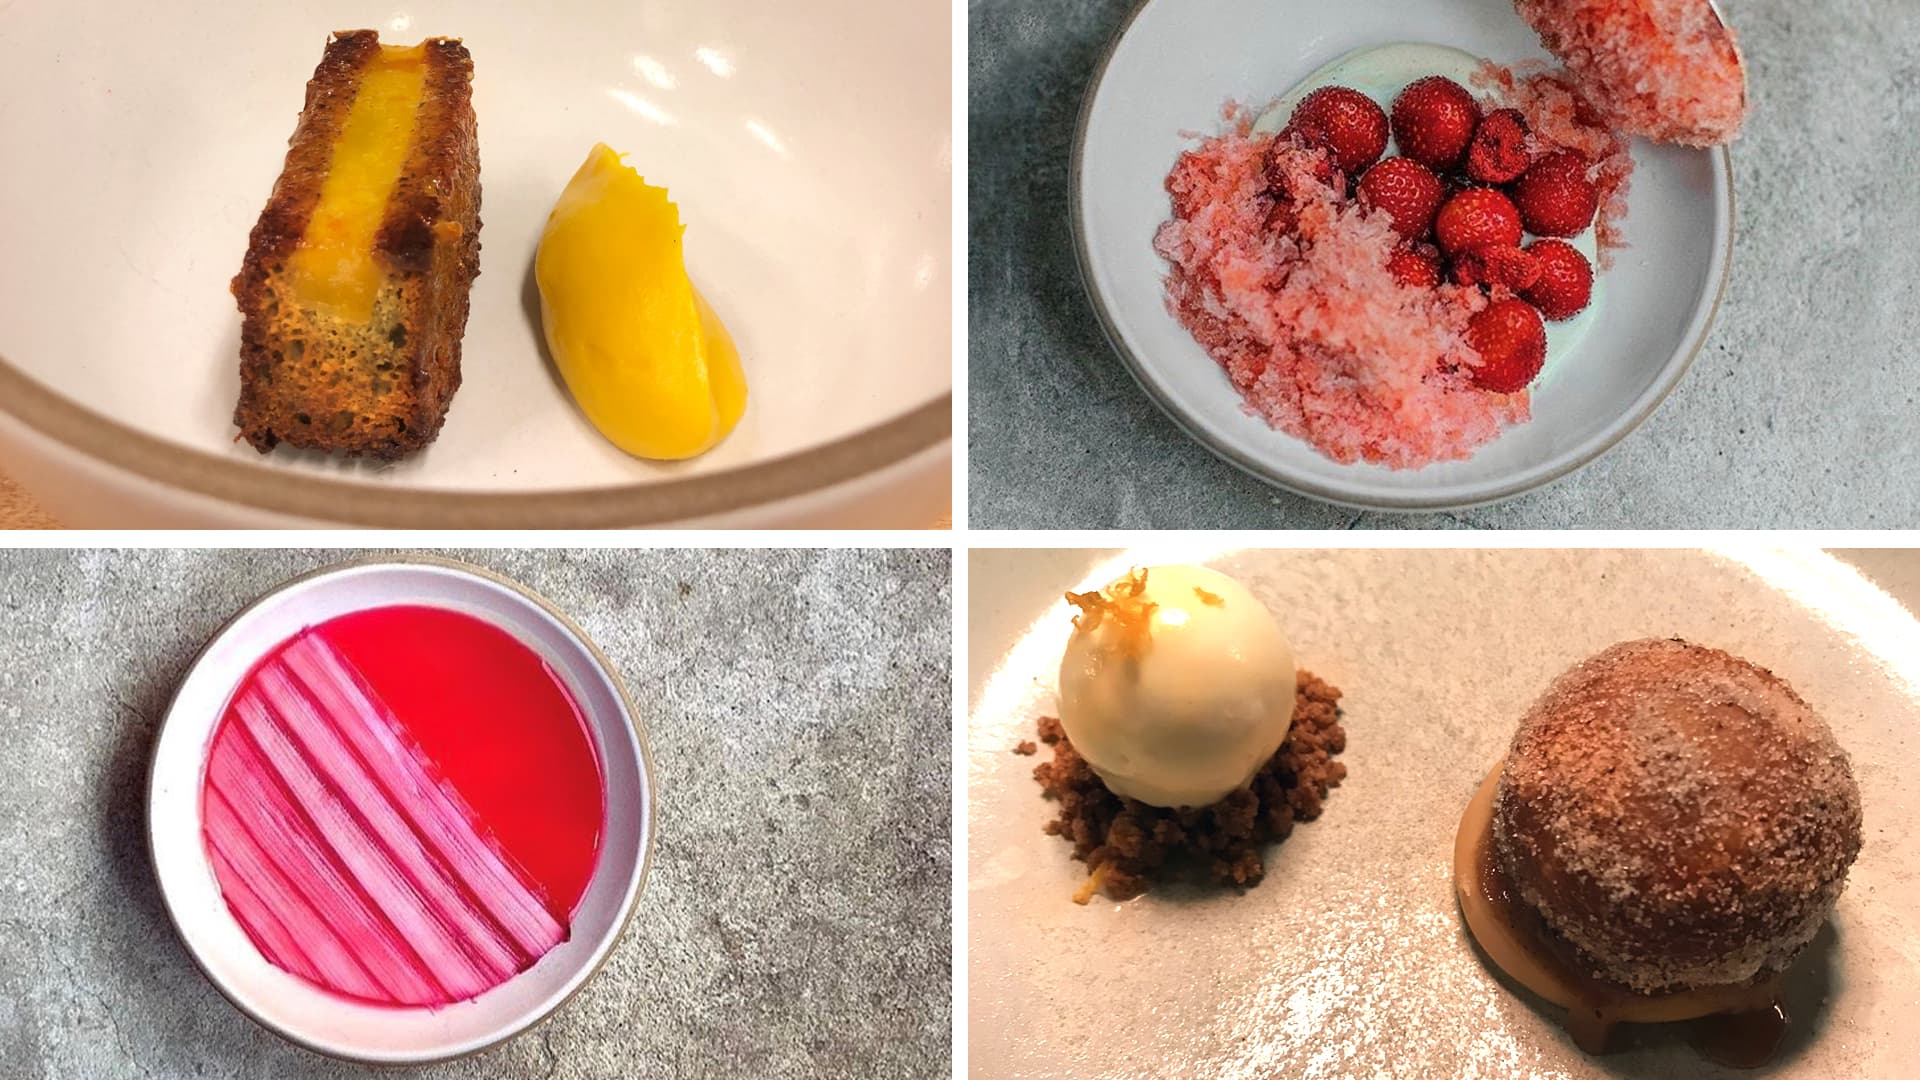  Cosme dishes that Josh worked on (clockwise): Squash 3.0; strawberry raspado; olive oil panna cotta with rhubarb; Pan de Muerto donut filled with cajeta, orange sherbet and cinnamon.